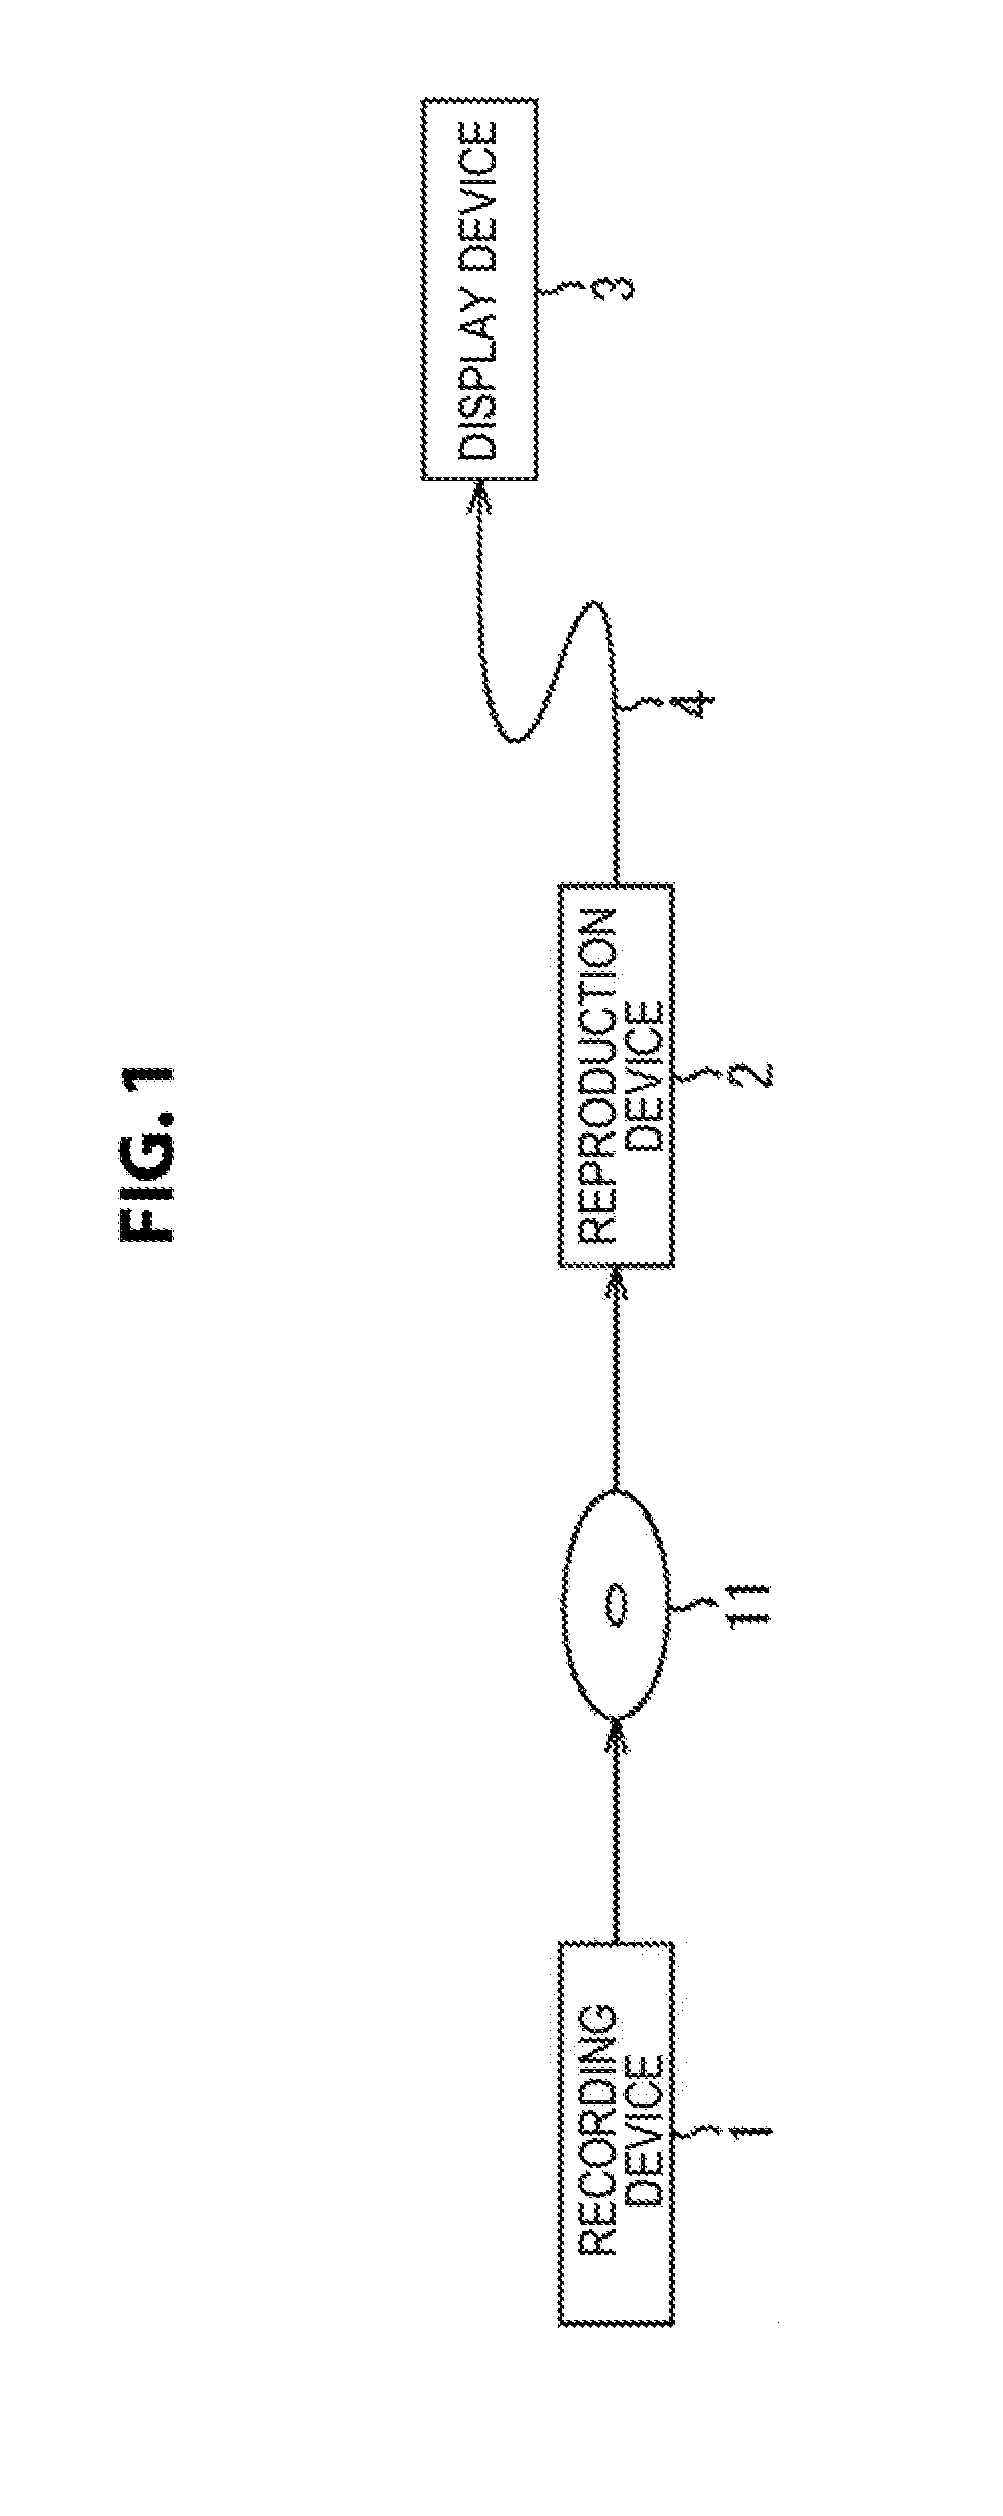 Reproduction device, reproduction method, and recording medium that display graphics based on tone mapping